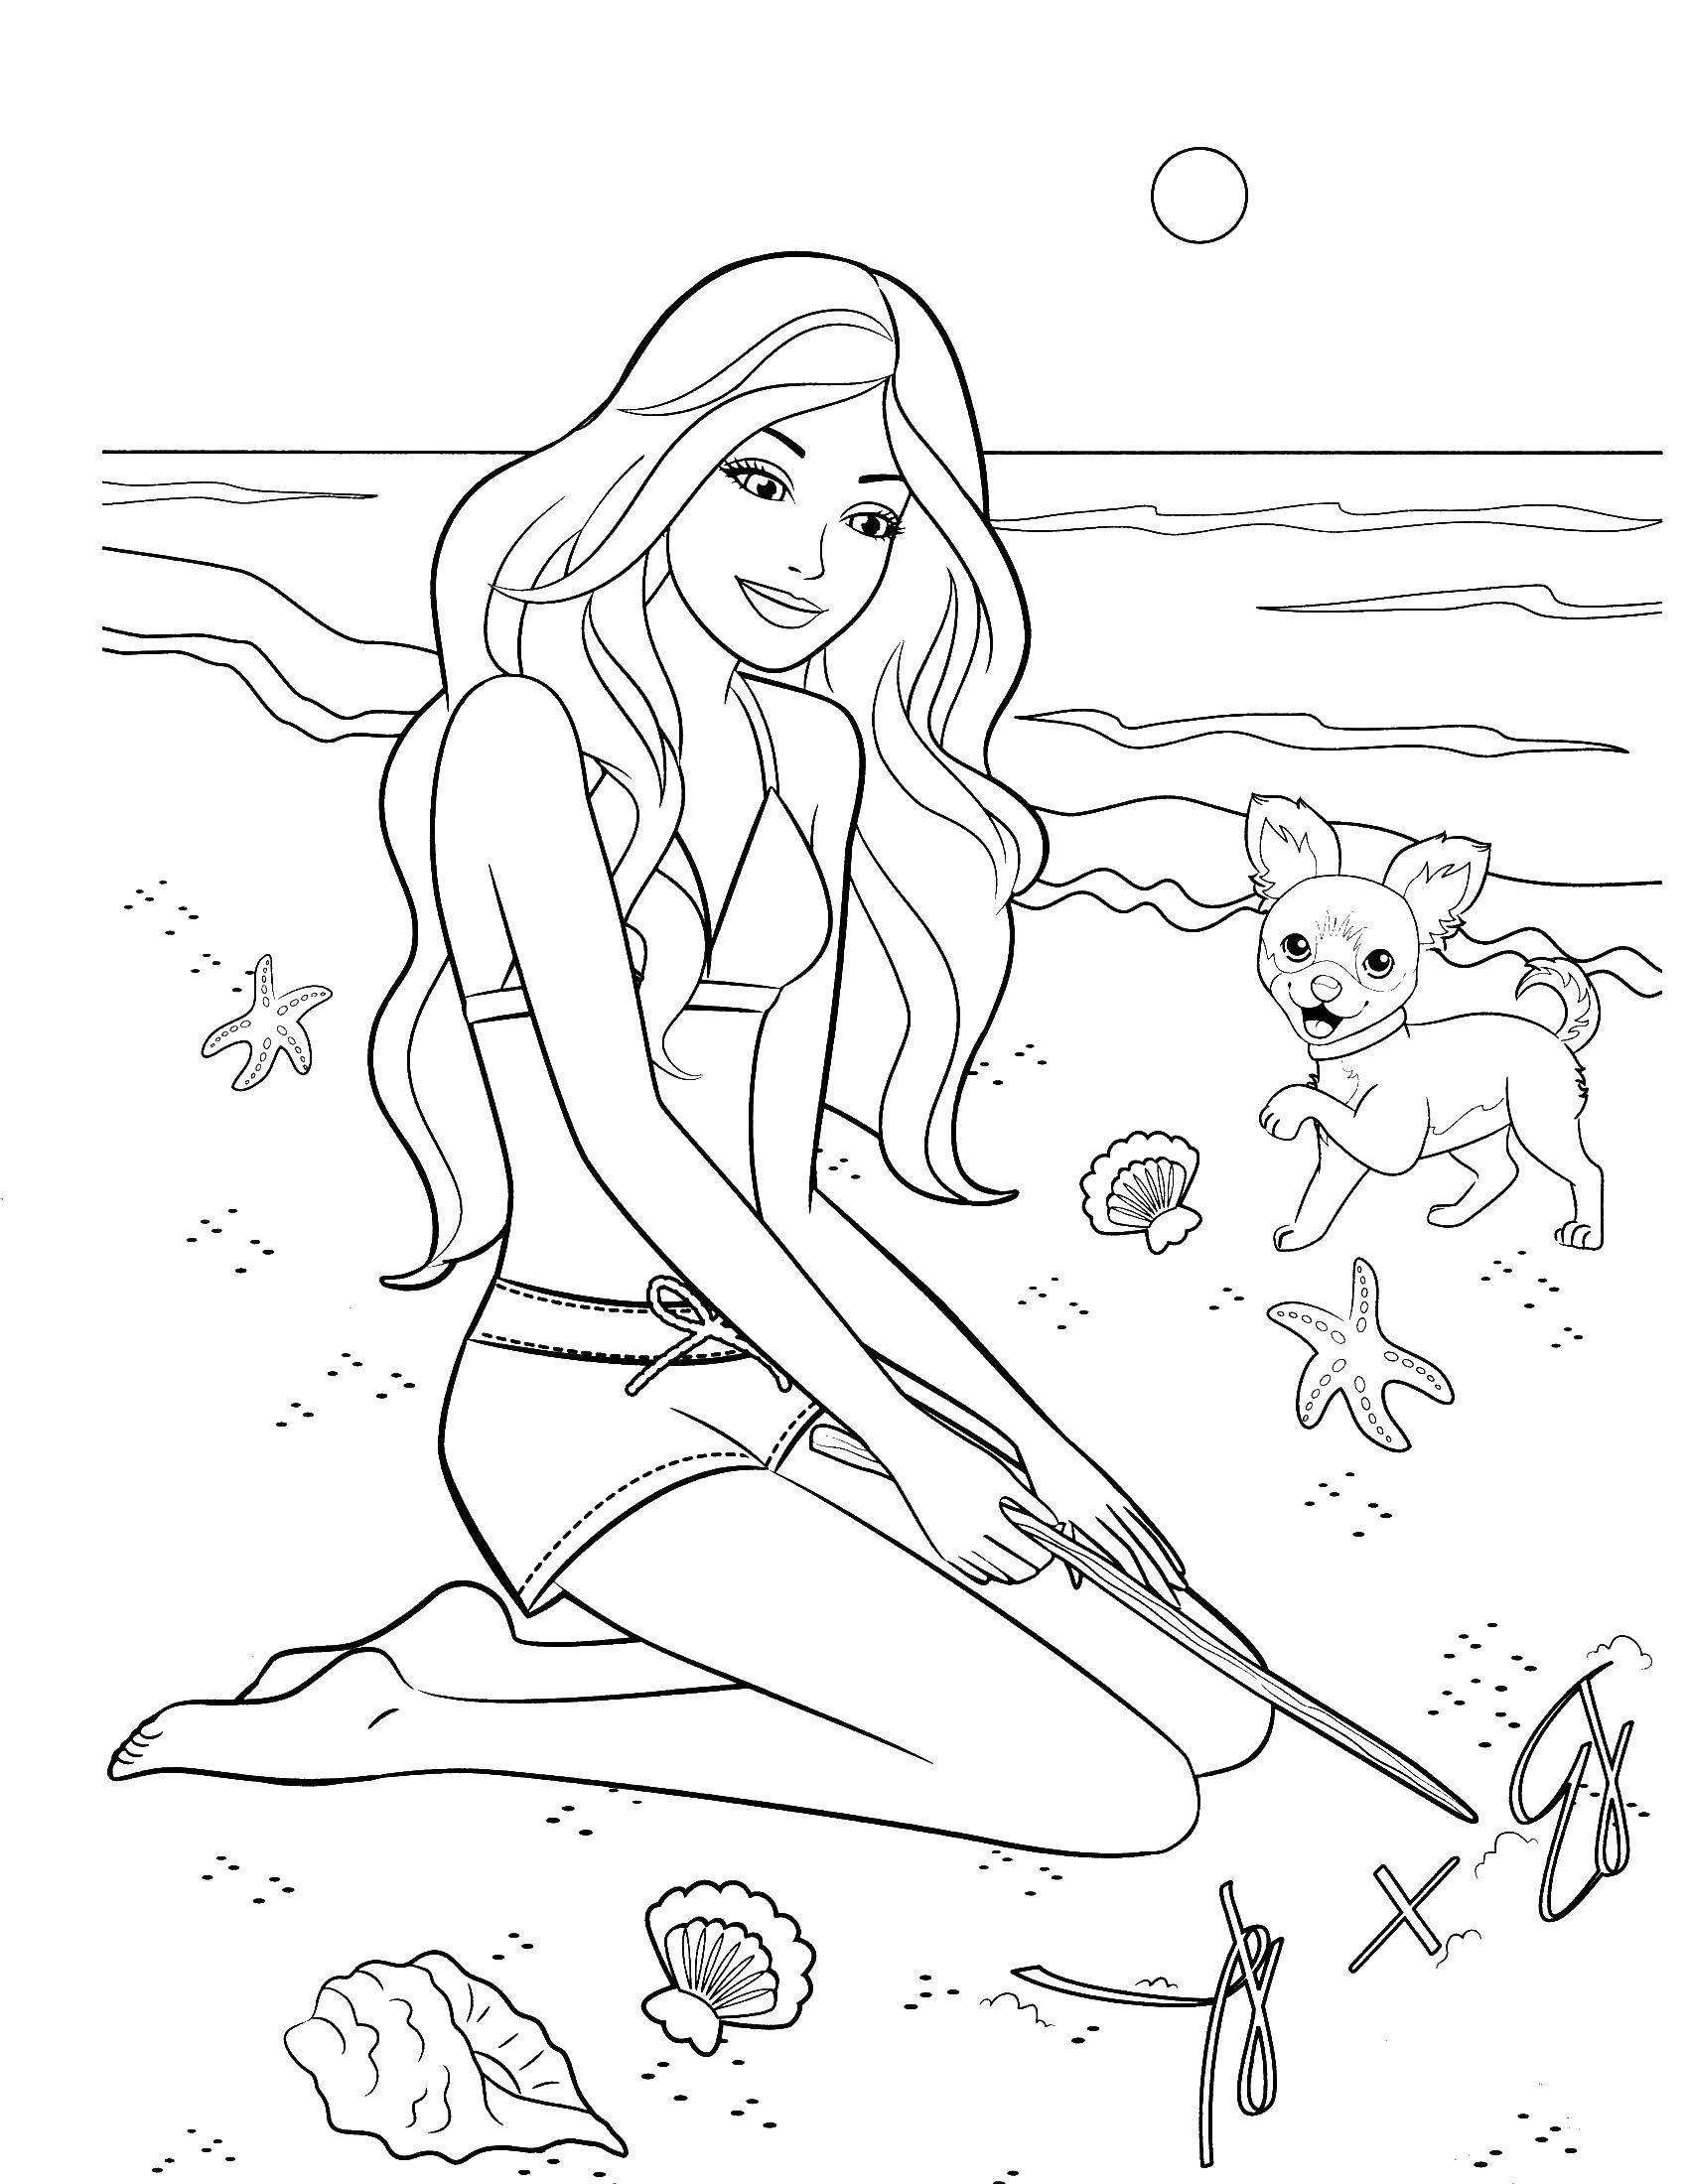 Coloring Barbie and her dog on the beach. Category Barbie . Tags:  Barbie , girl, doll.